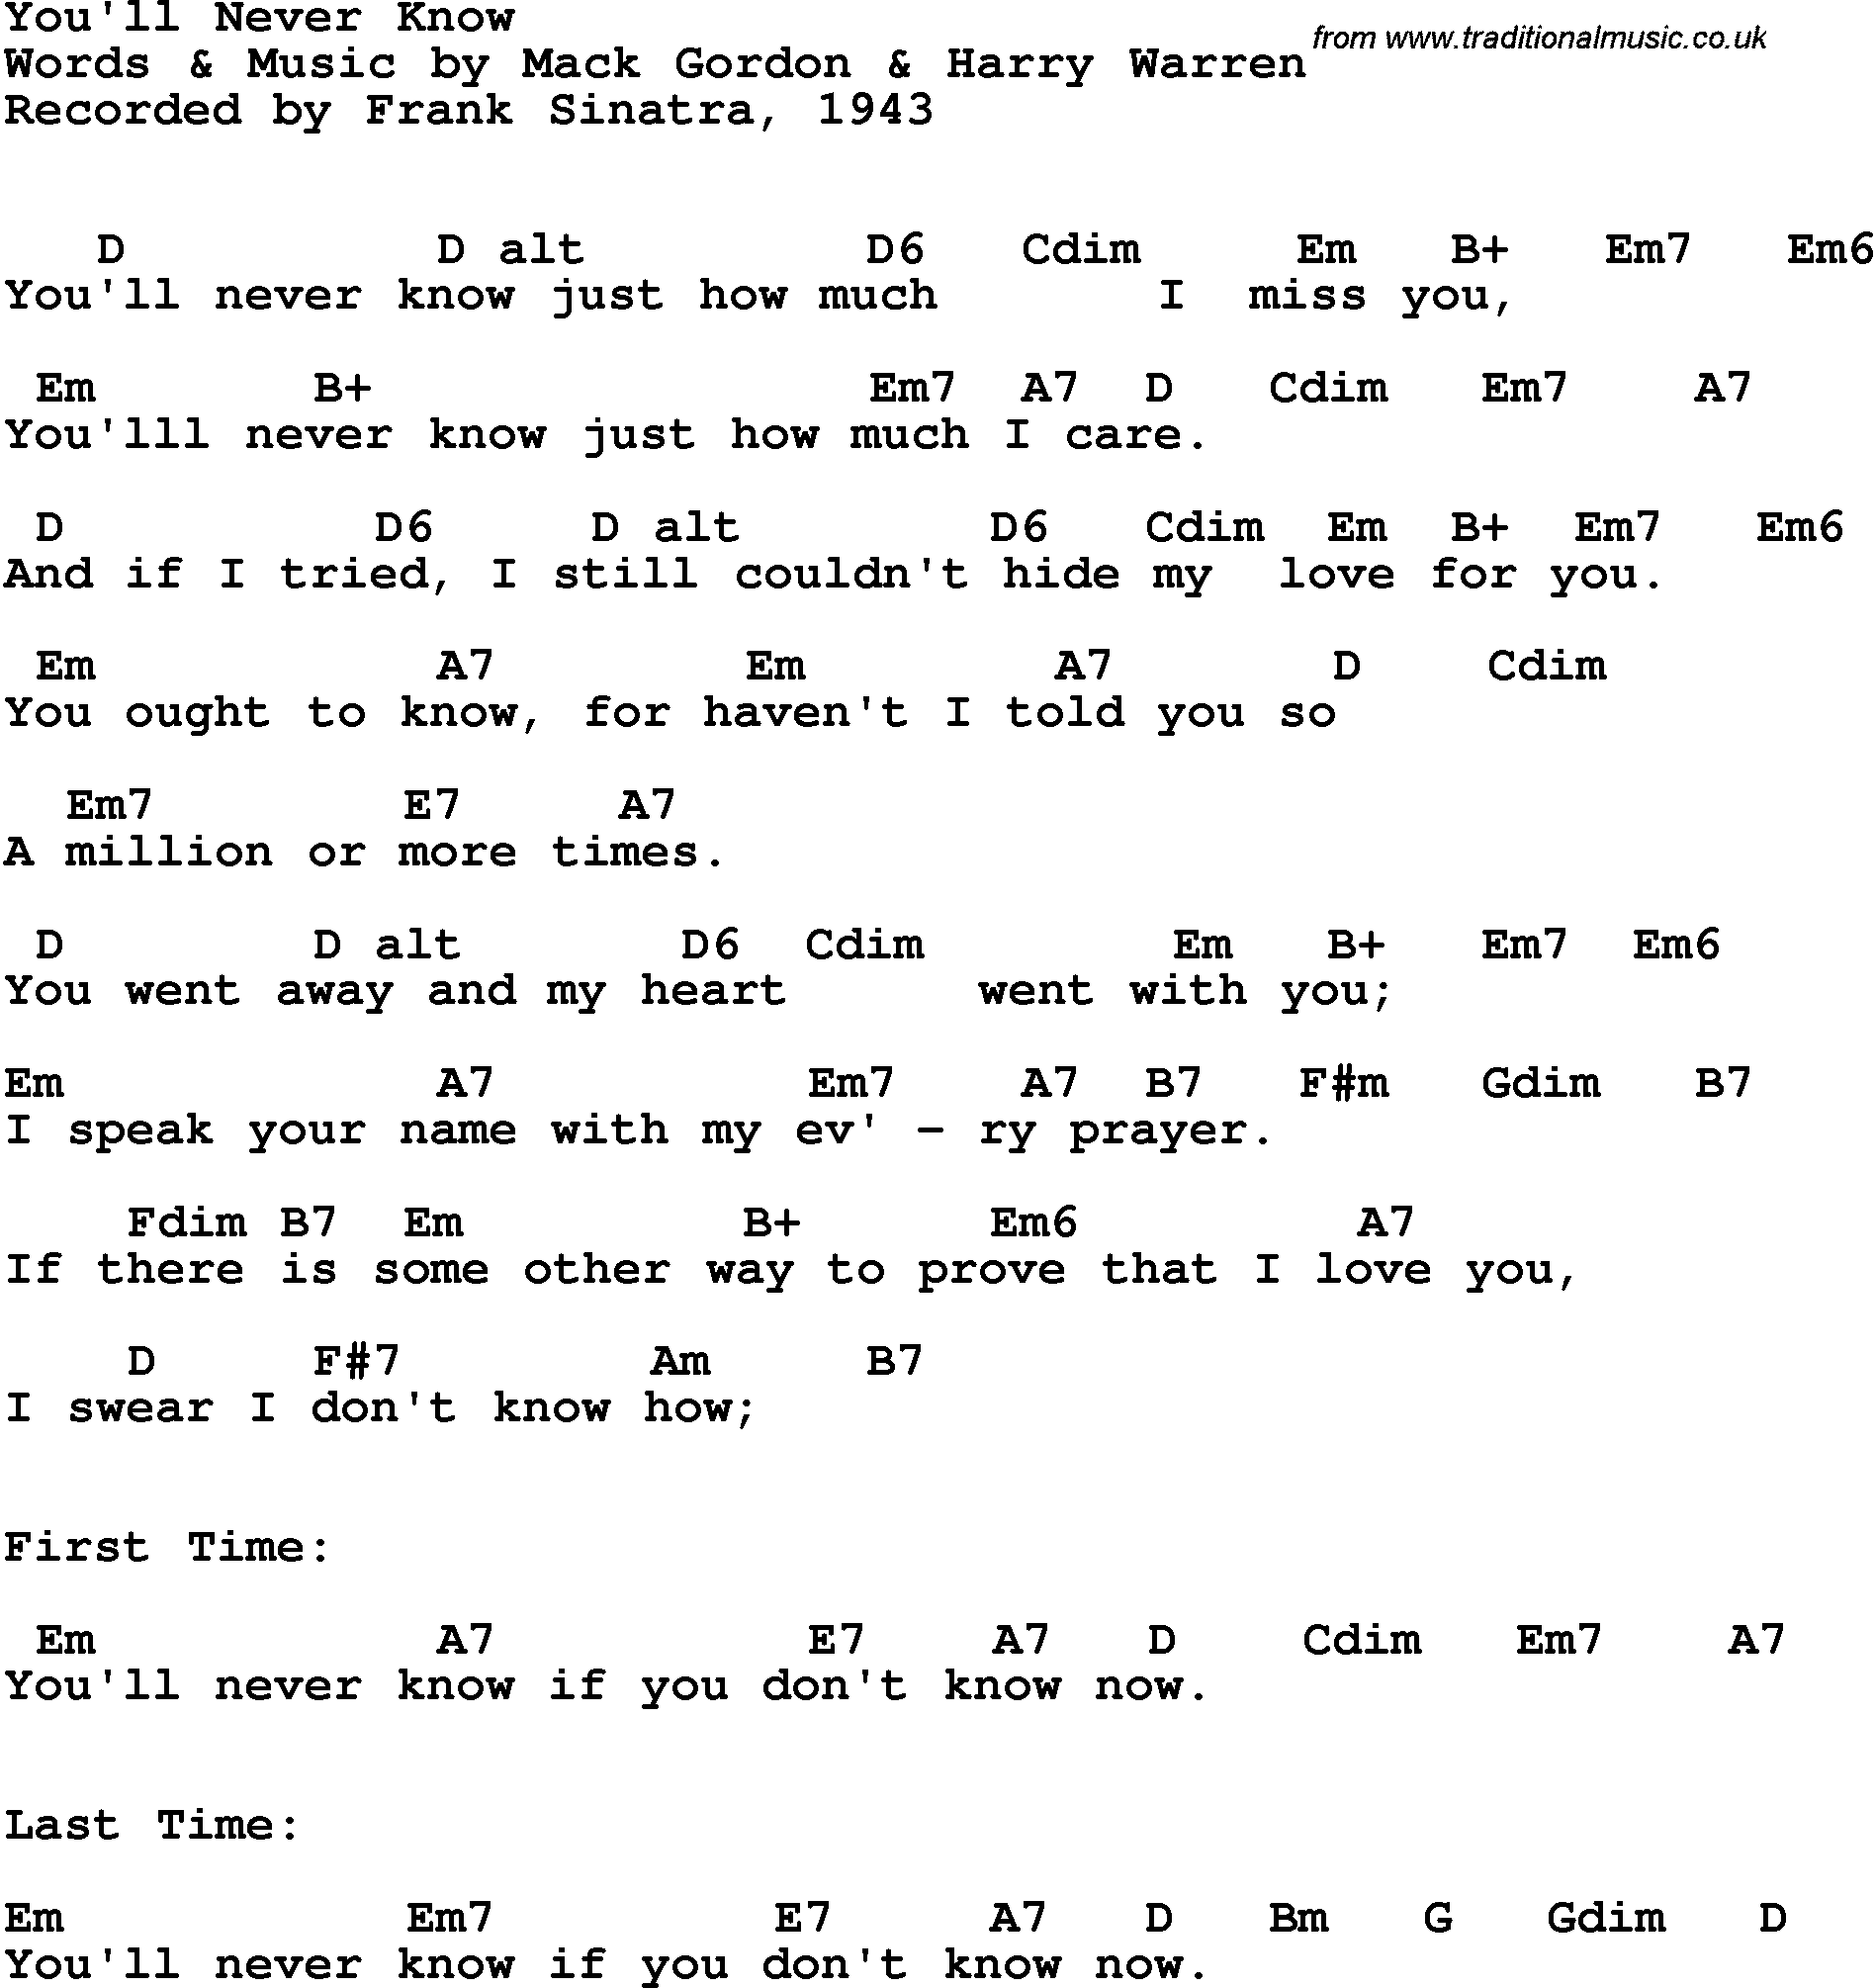 Song Lyrics with guitar chords for You'll Never Know - Frank Sinatra, 1943